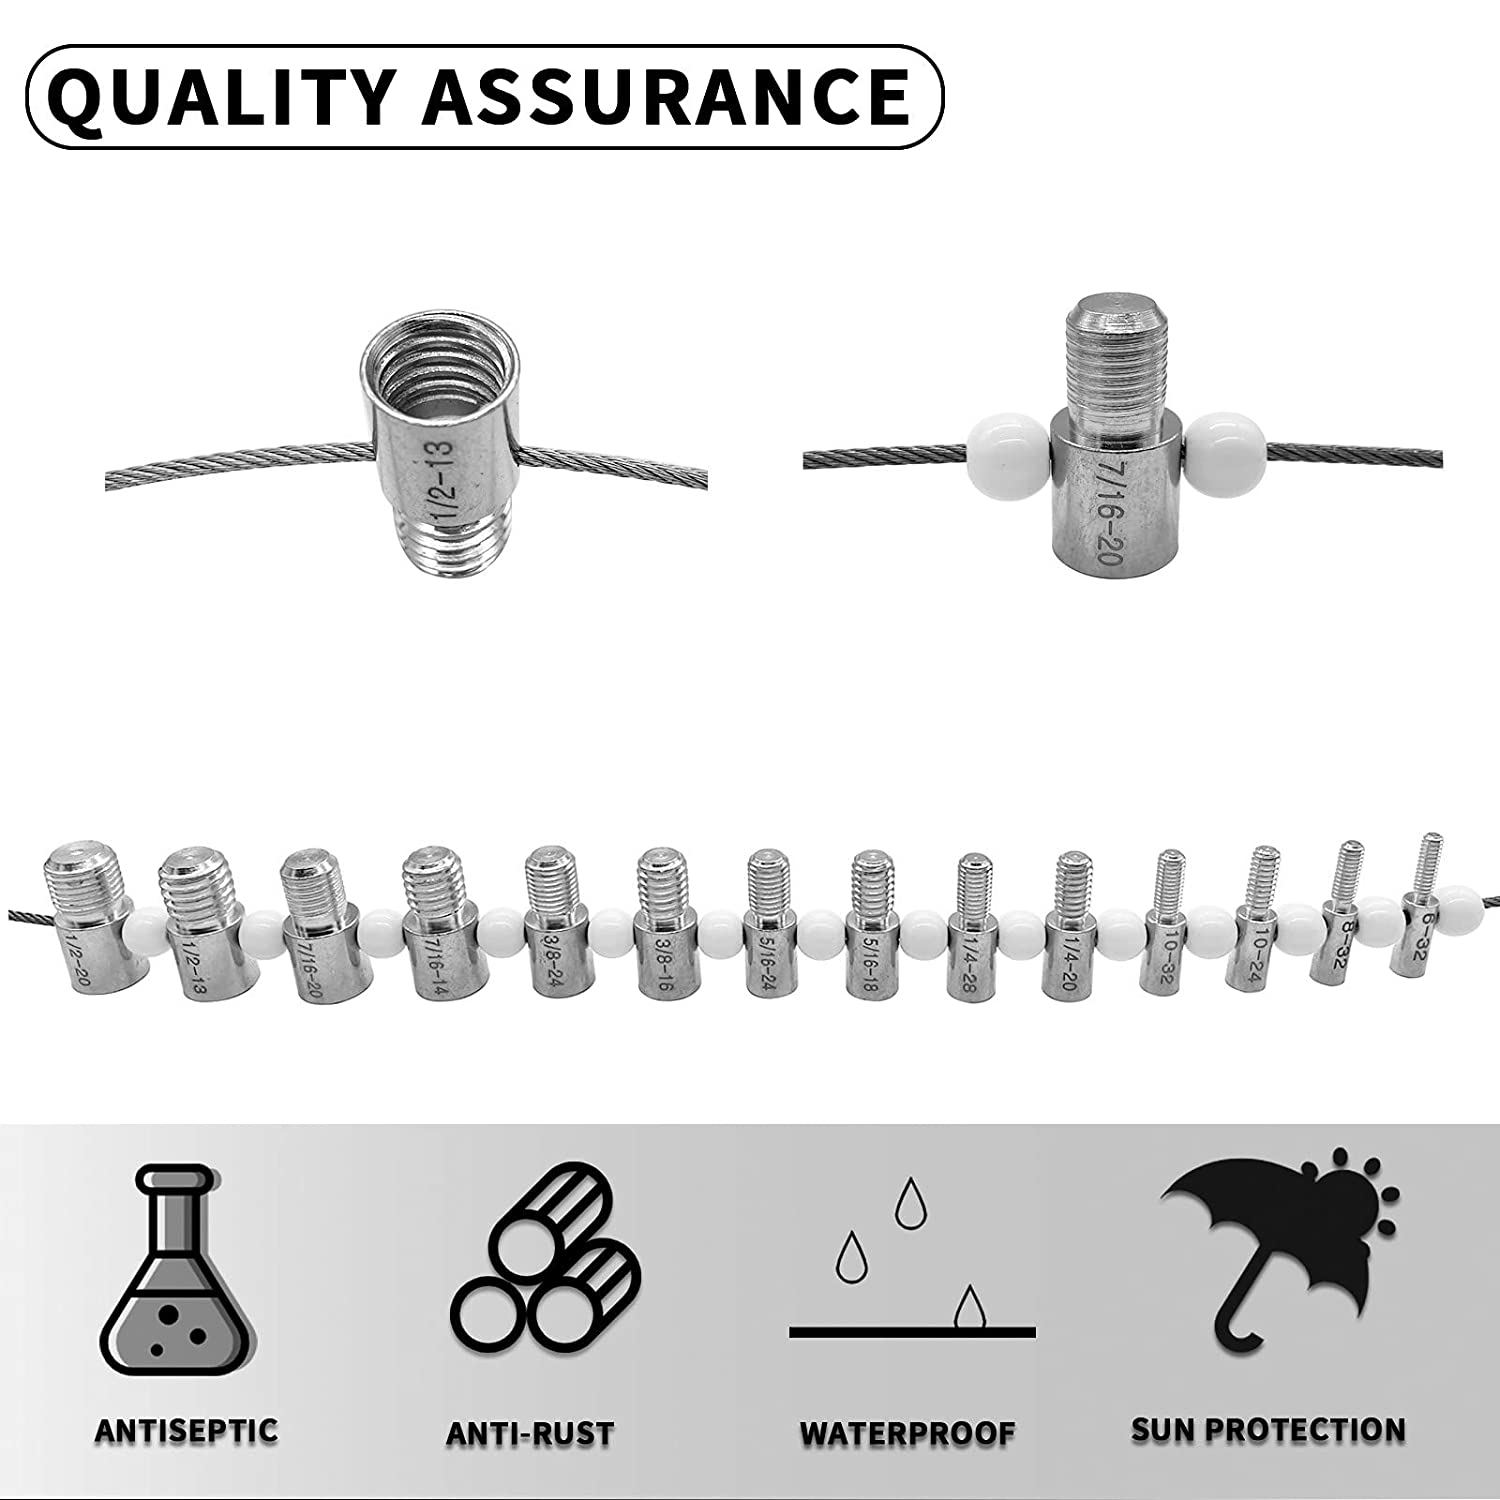 26 Male/Female Gauges For Nut And Bolt and 50 similar items